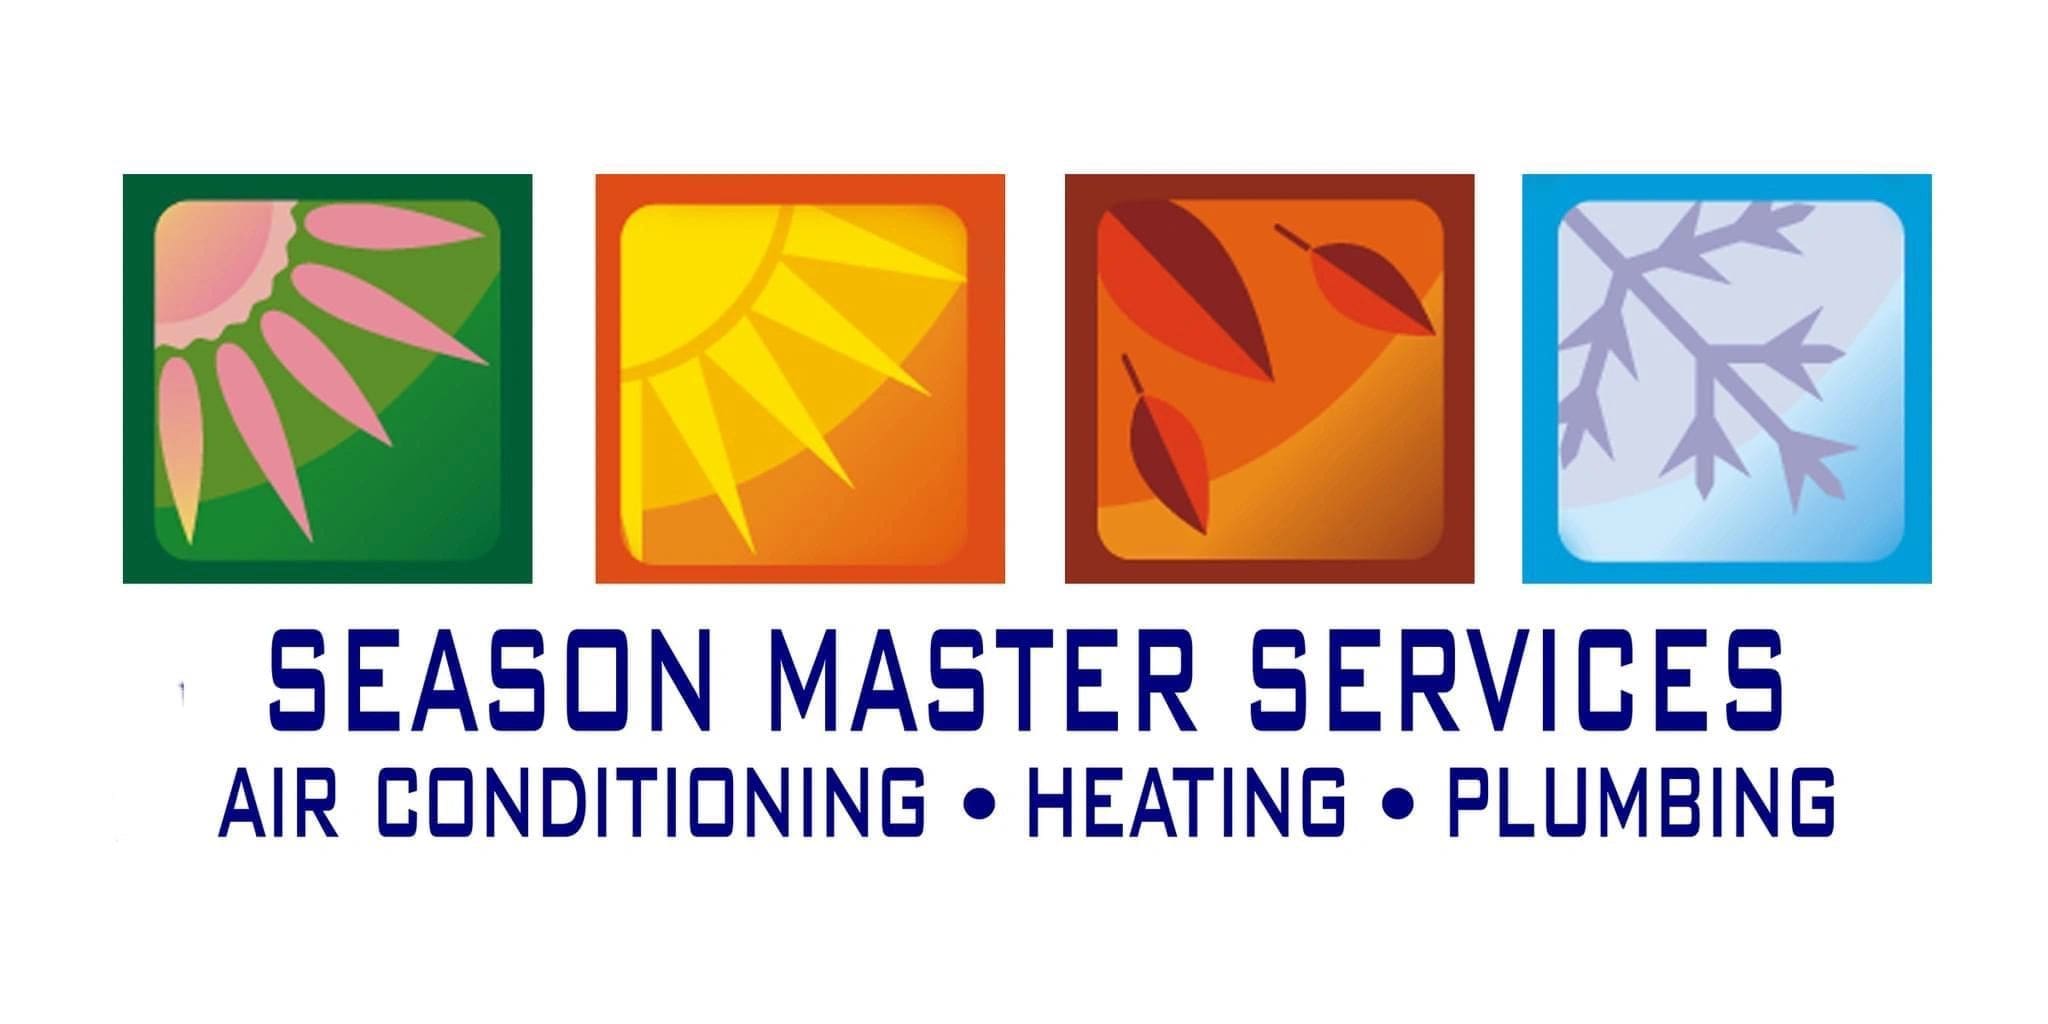 A logo of the company that is called jackson master services.